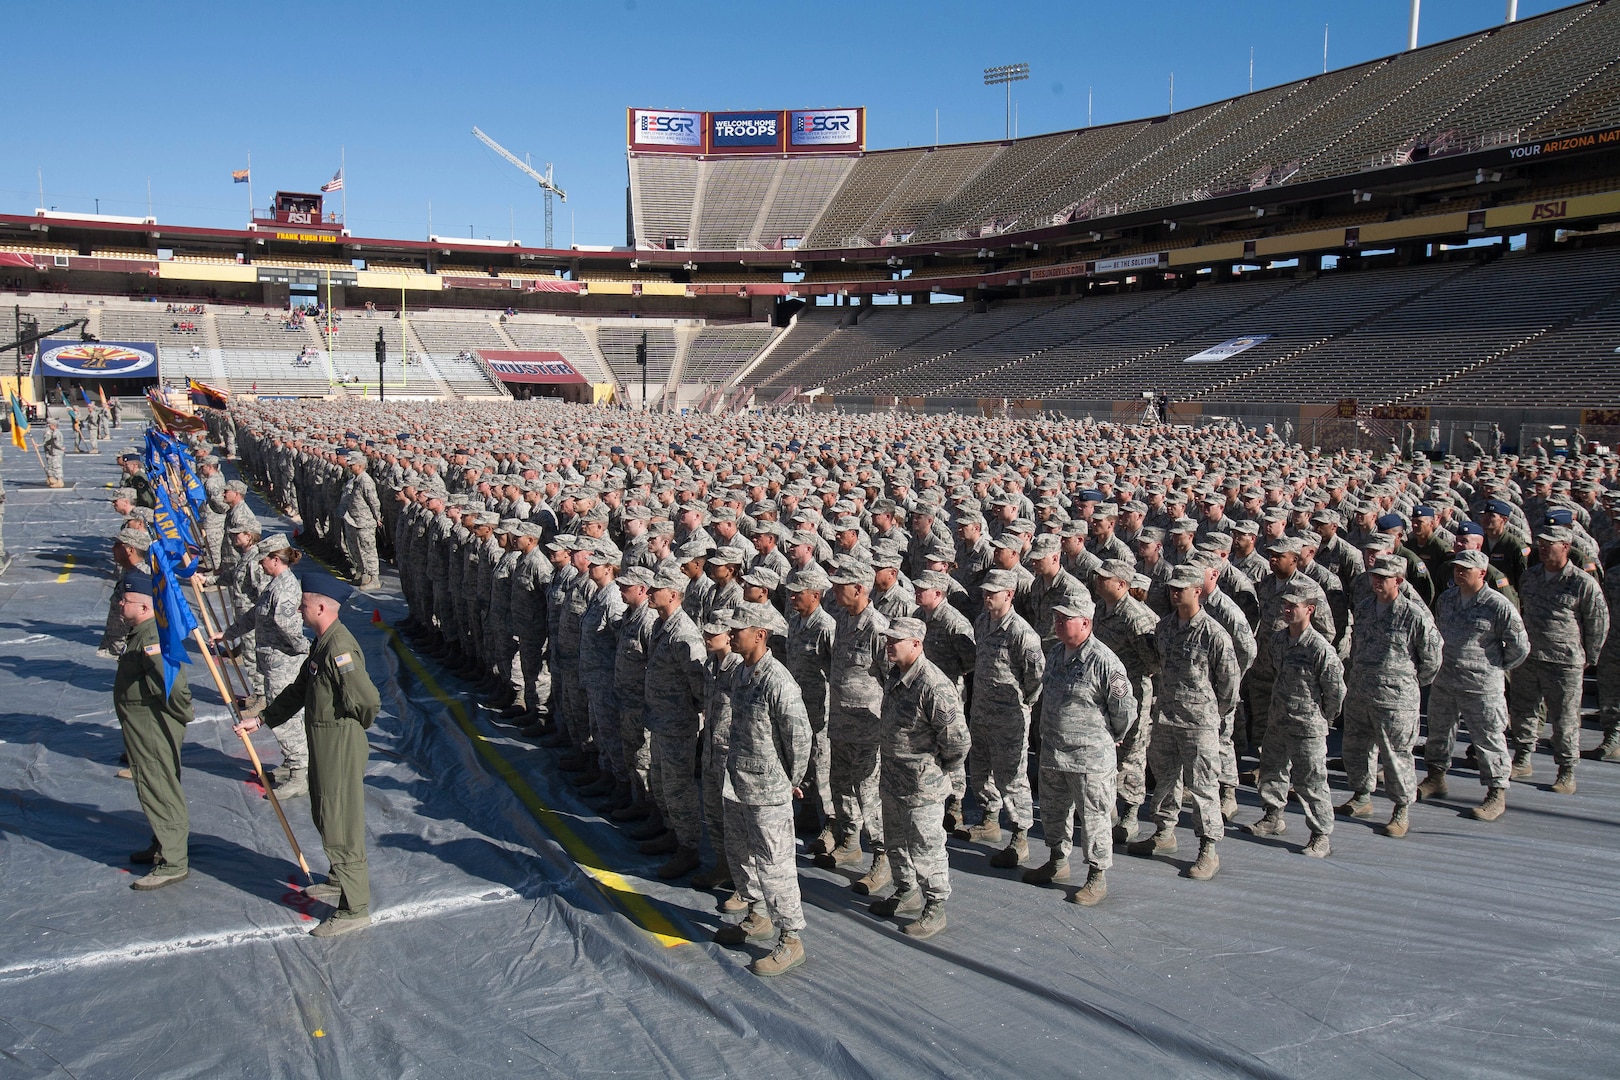 Arizona National Guard Soldiers from the 158th Maneuver Enhancement Brigade stand in formation on the field at Arizona State University’s Sun Devil Stadium, Dec. 7, 2014 in Tempe.  The formation, which was part of the Arizona National Guard Muster and Community Expo, was the first time in over a century Arizona Soldiers and Airmen assembled together in mass formation.